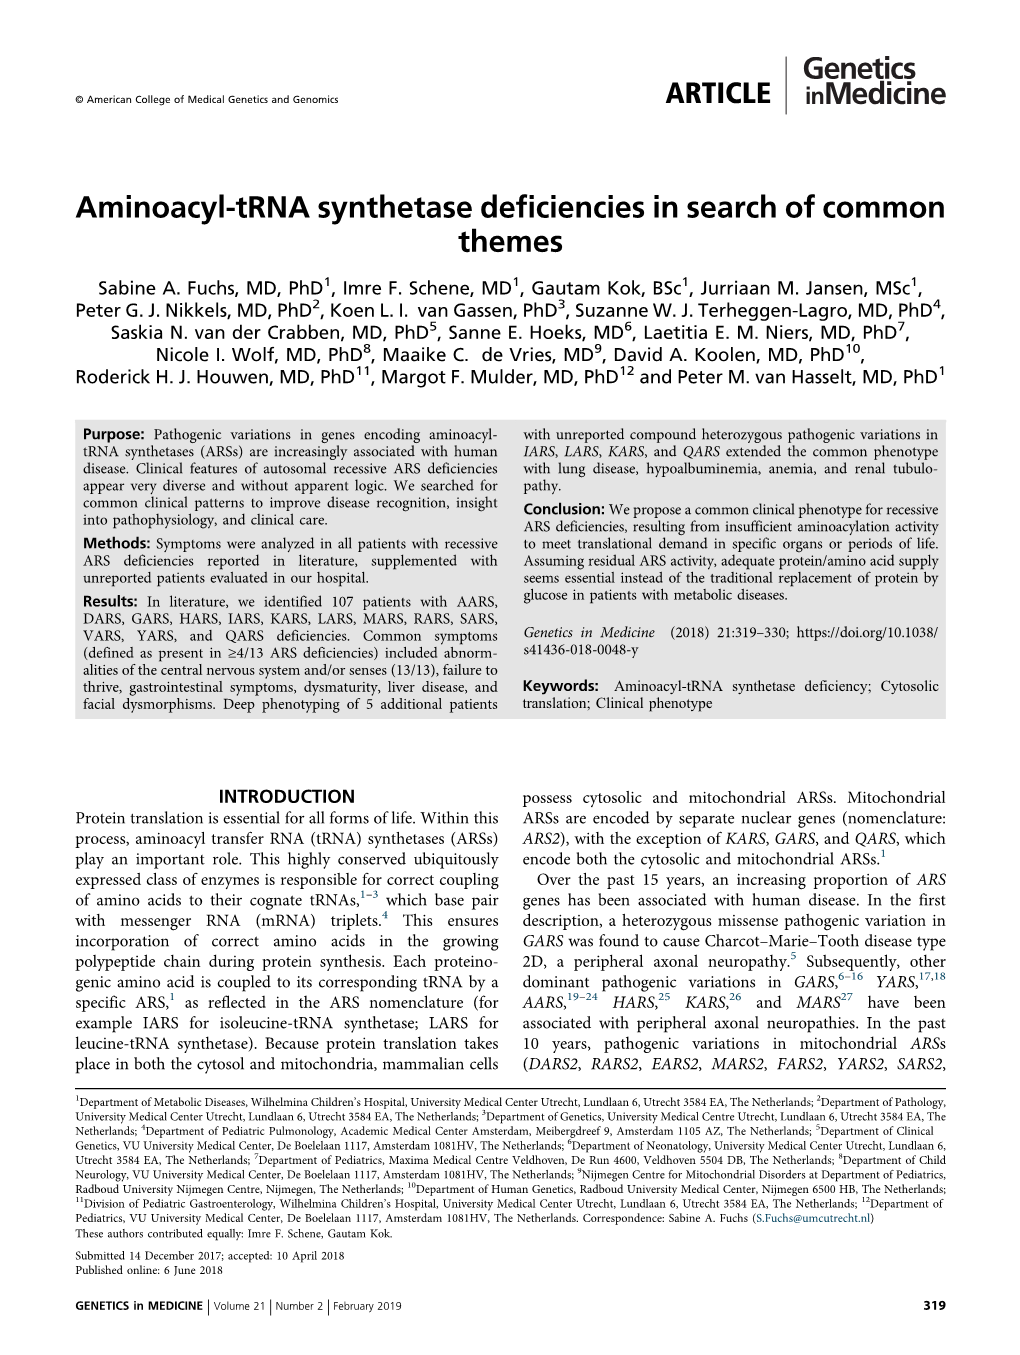 Aminoacyl-Trna Synthetase Deficiencies in Search of Common Themes